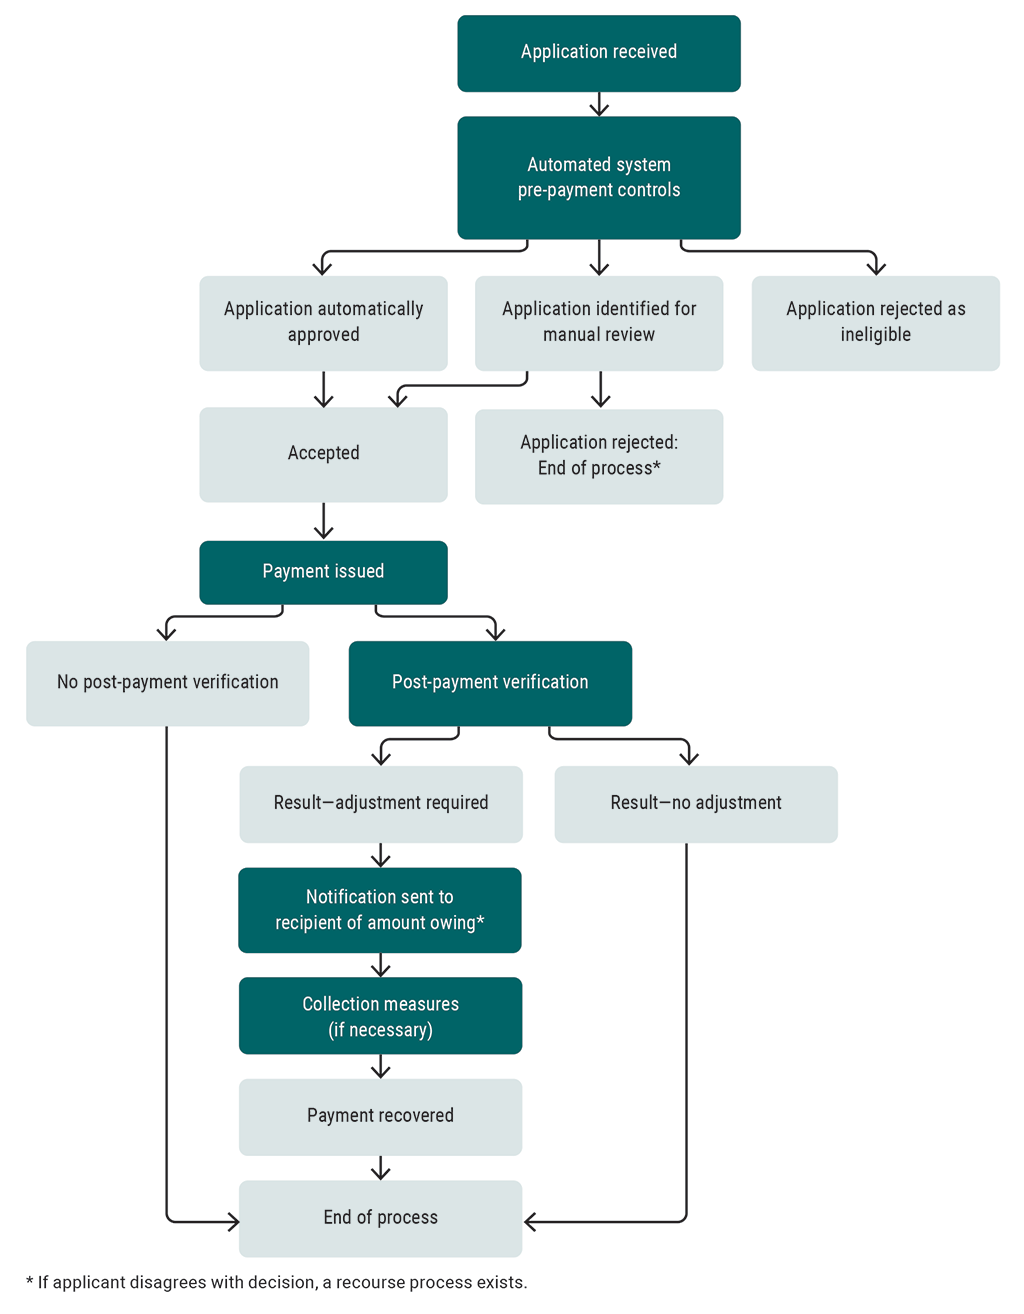 Flowchart showing a simplified version of the COVID-19 benefit application process for individuals and employers